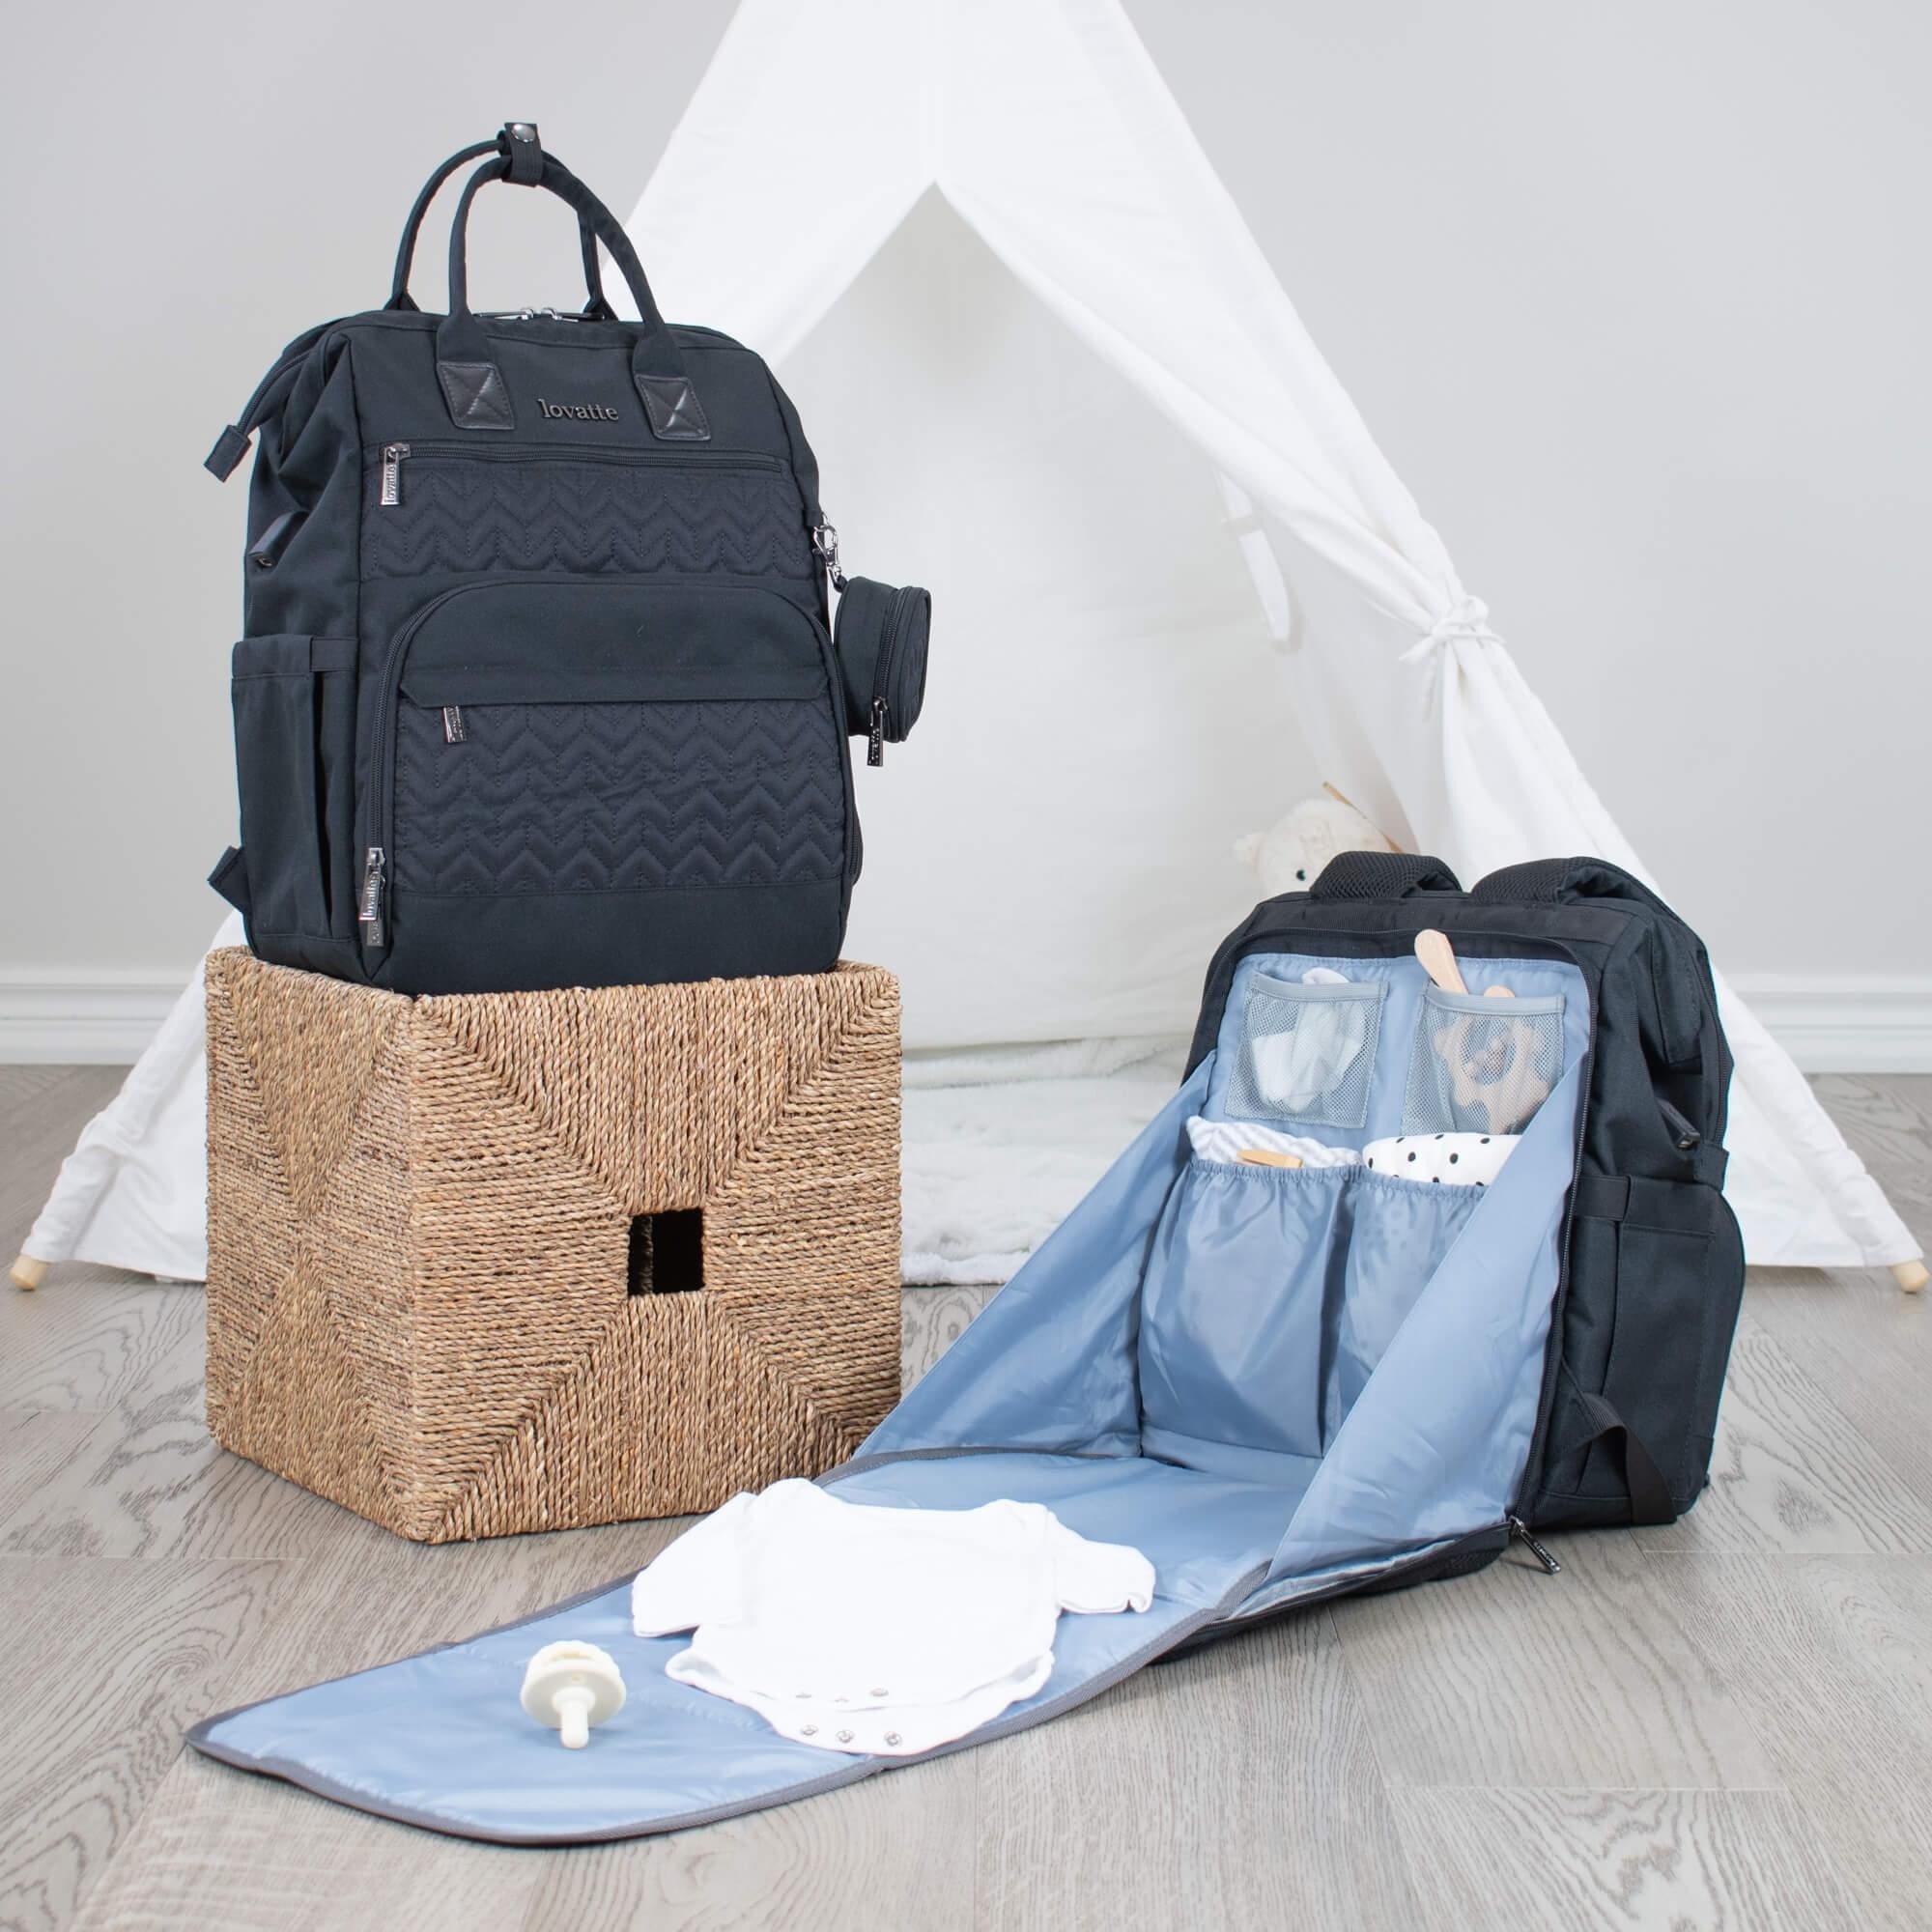 Tips On Efficiently Packing Your Changing Bag For On-The-Go Parenting